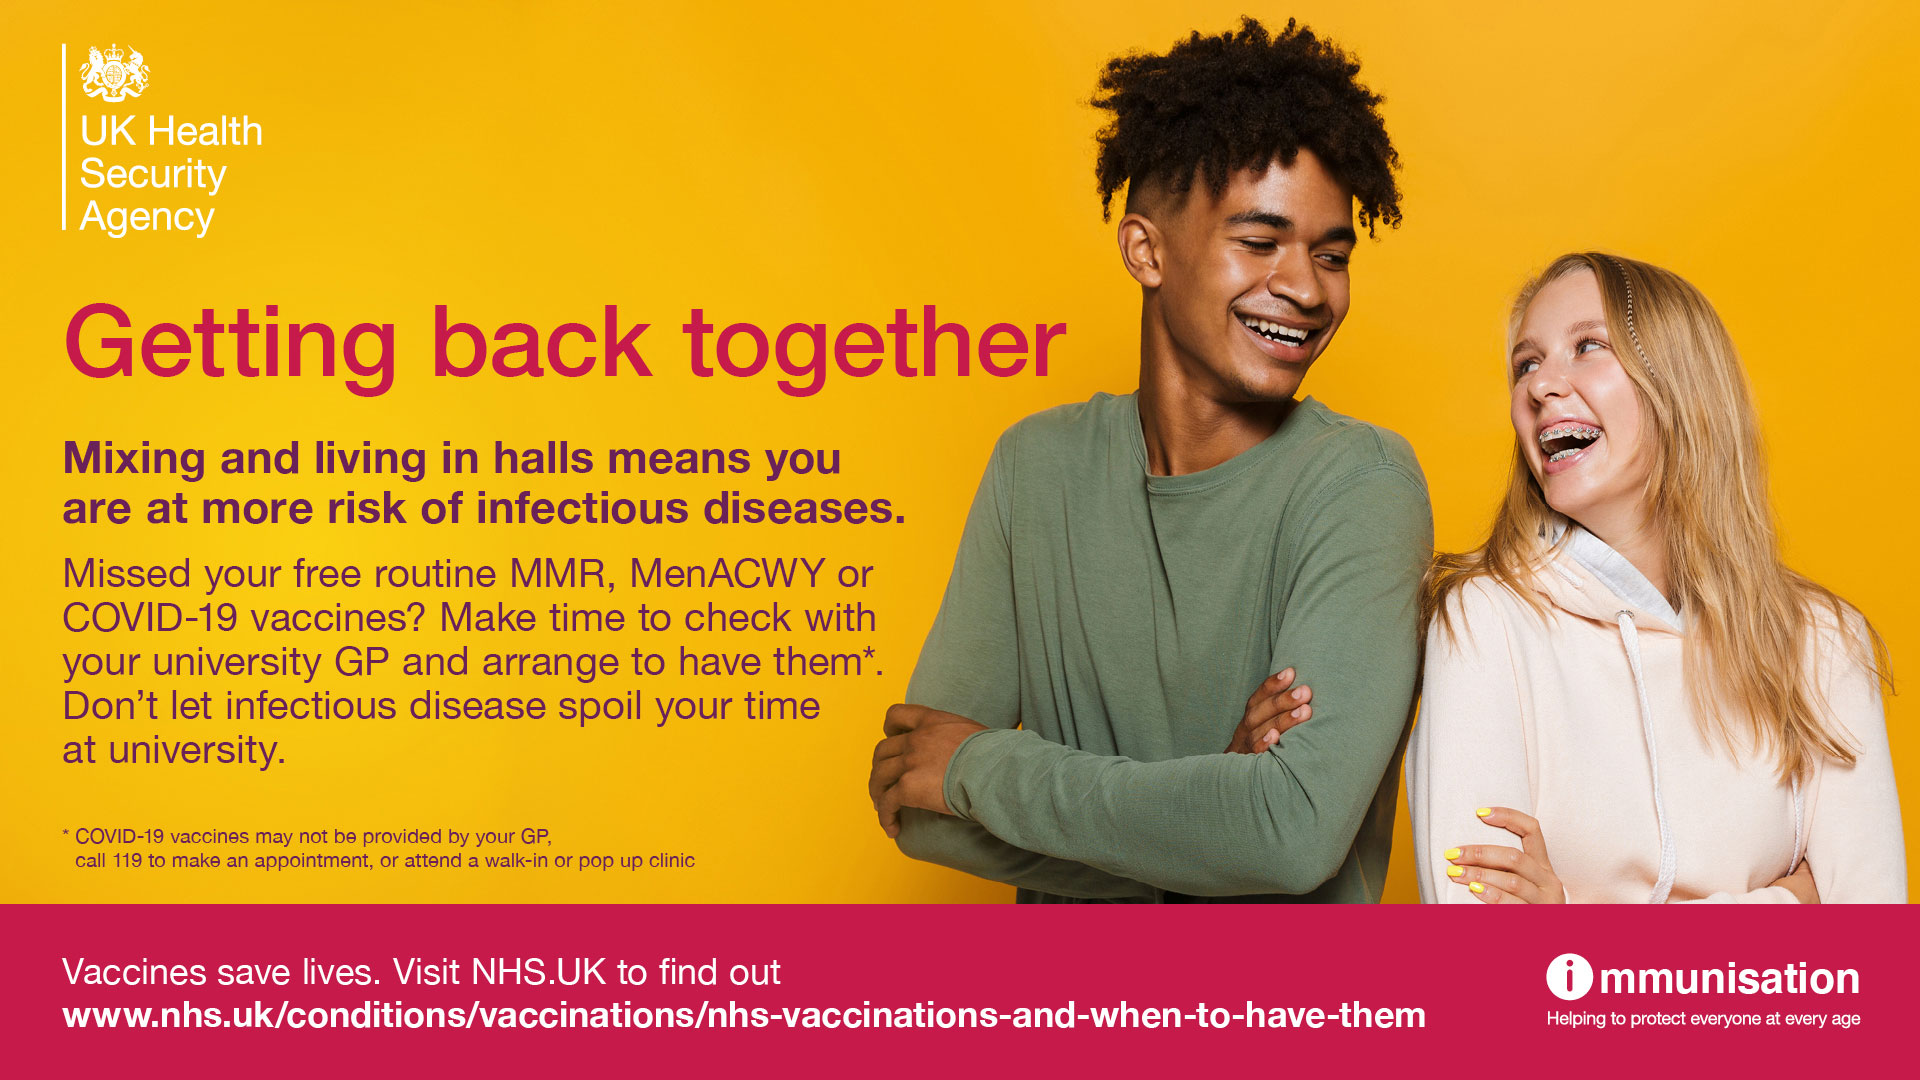 Getting back together. Mixing in and living in halls means you are at more risk of infectious diseases. Missed your free routine MMR, MenACWY or Covid-19 vaccines? Make tie to check with yout university GP and arrange to have them. Don't let infectious disease spoil your time at university.